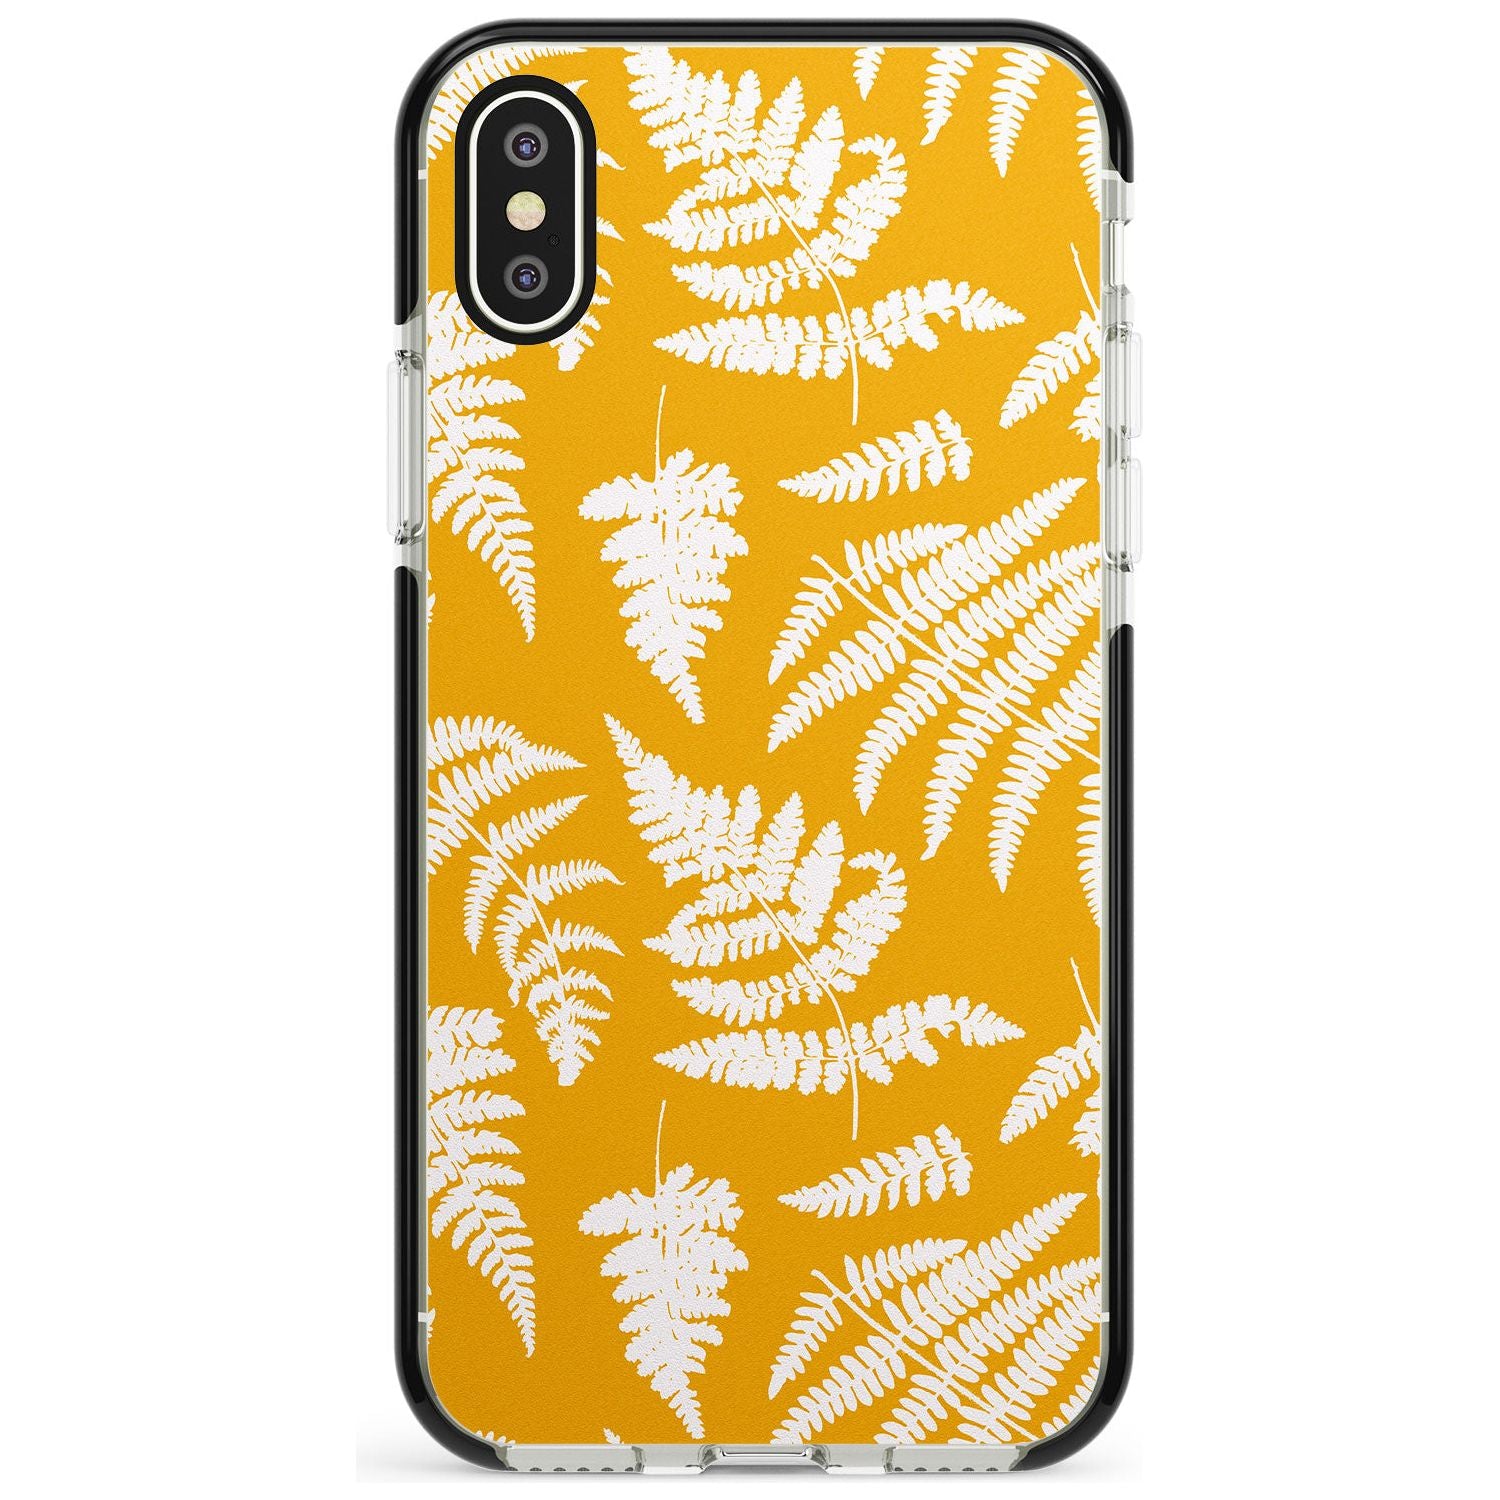 Fern Pattern on Yellow Black Impact Phone Case for iPhone X XS Max XR